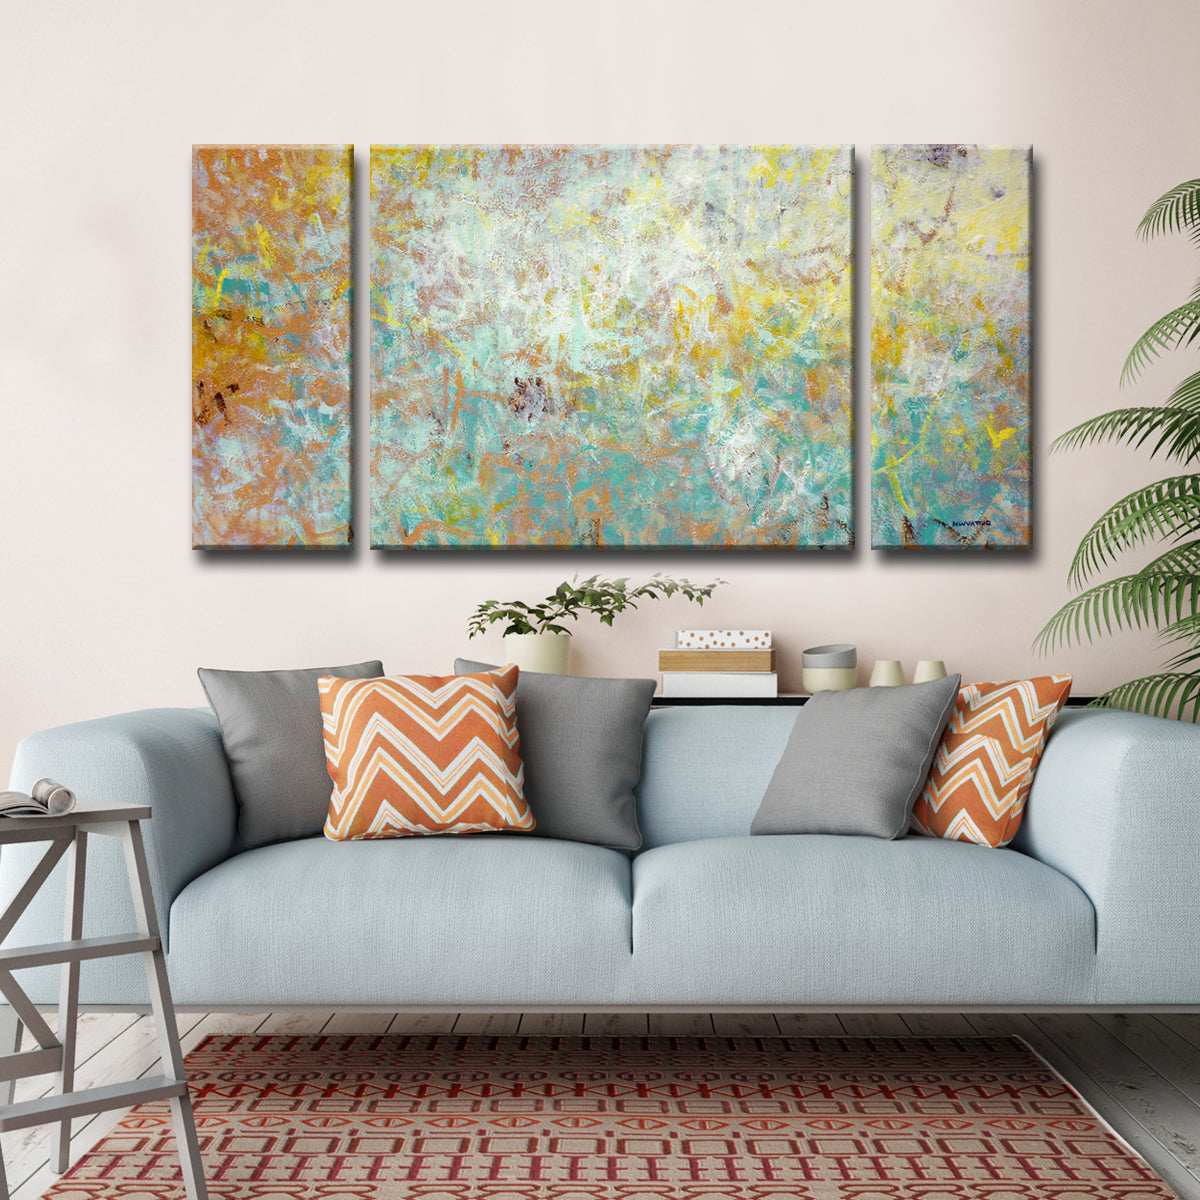 'Uplifted' 3 Piece Wrapped Canvas Wall Art Set by Norman Wyatt Jr ...